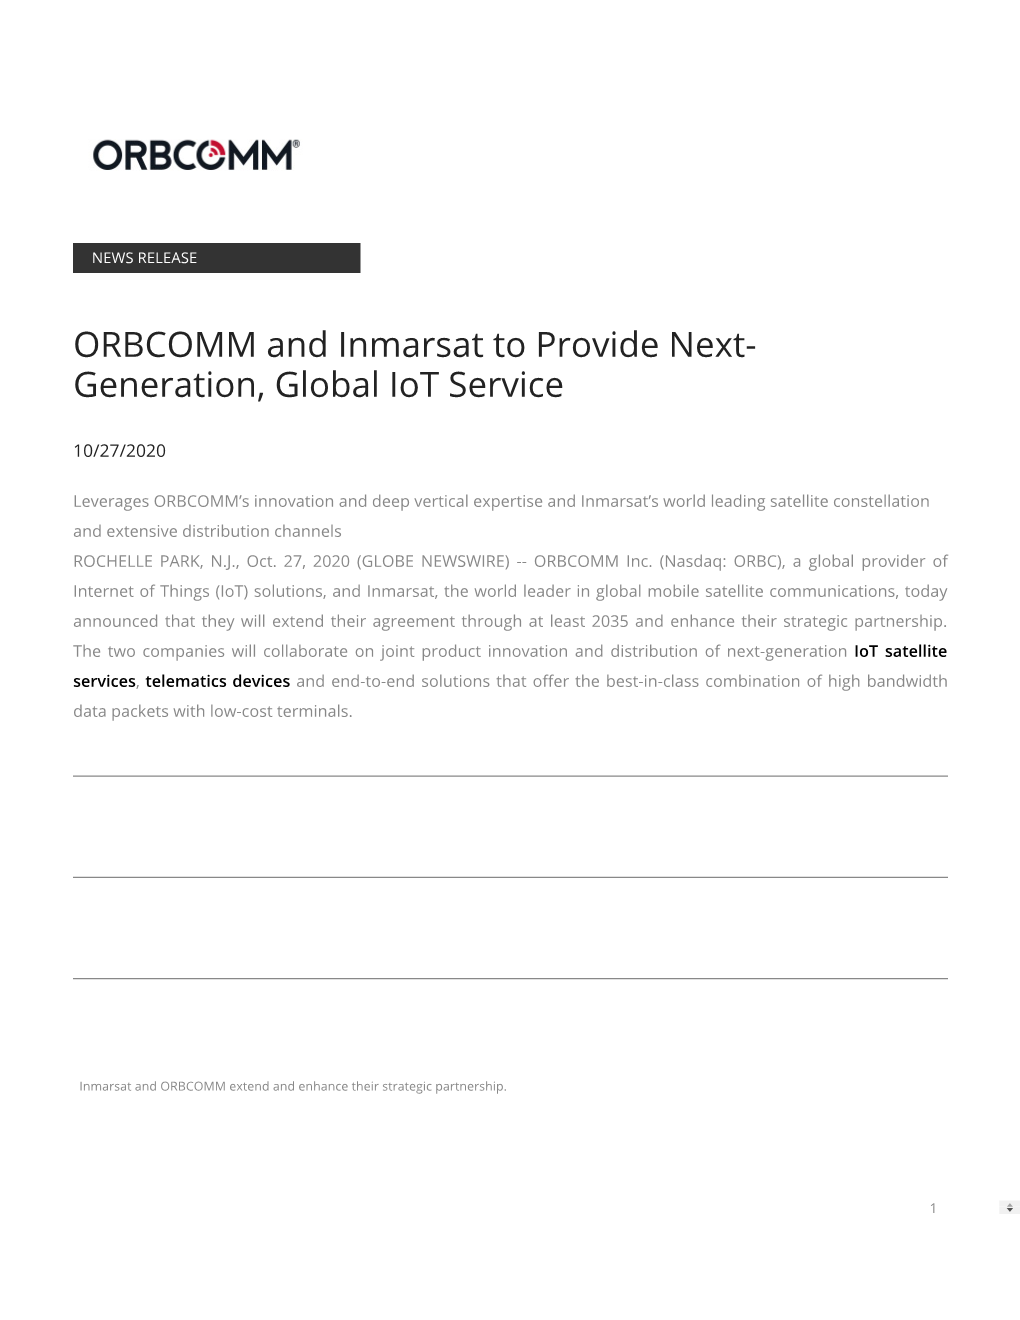 ORBCOMM and Inmarsat to Provide Next- Generation, Global Iot Service